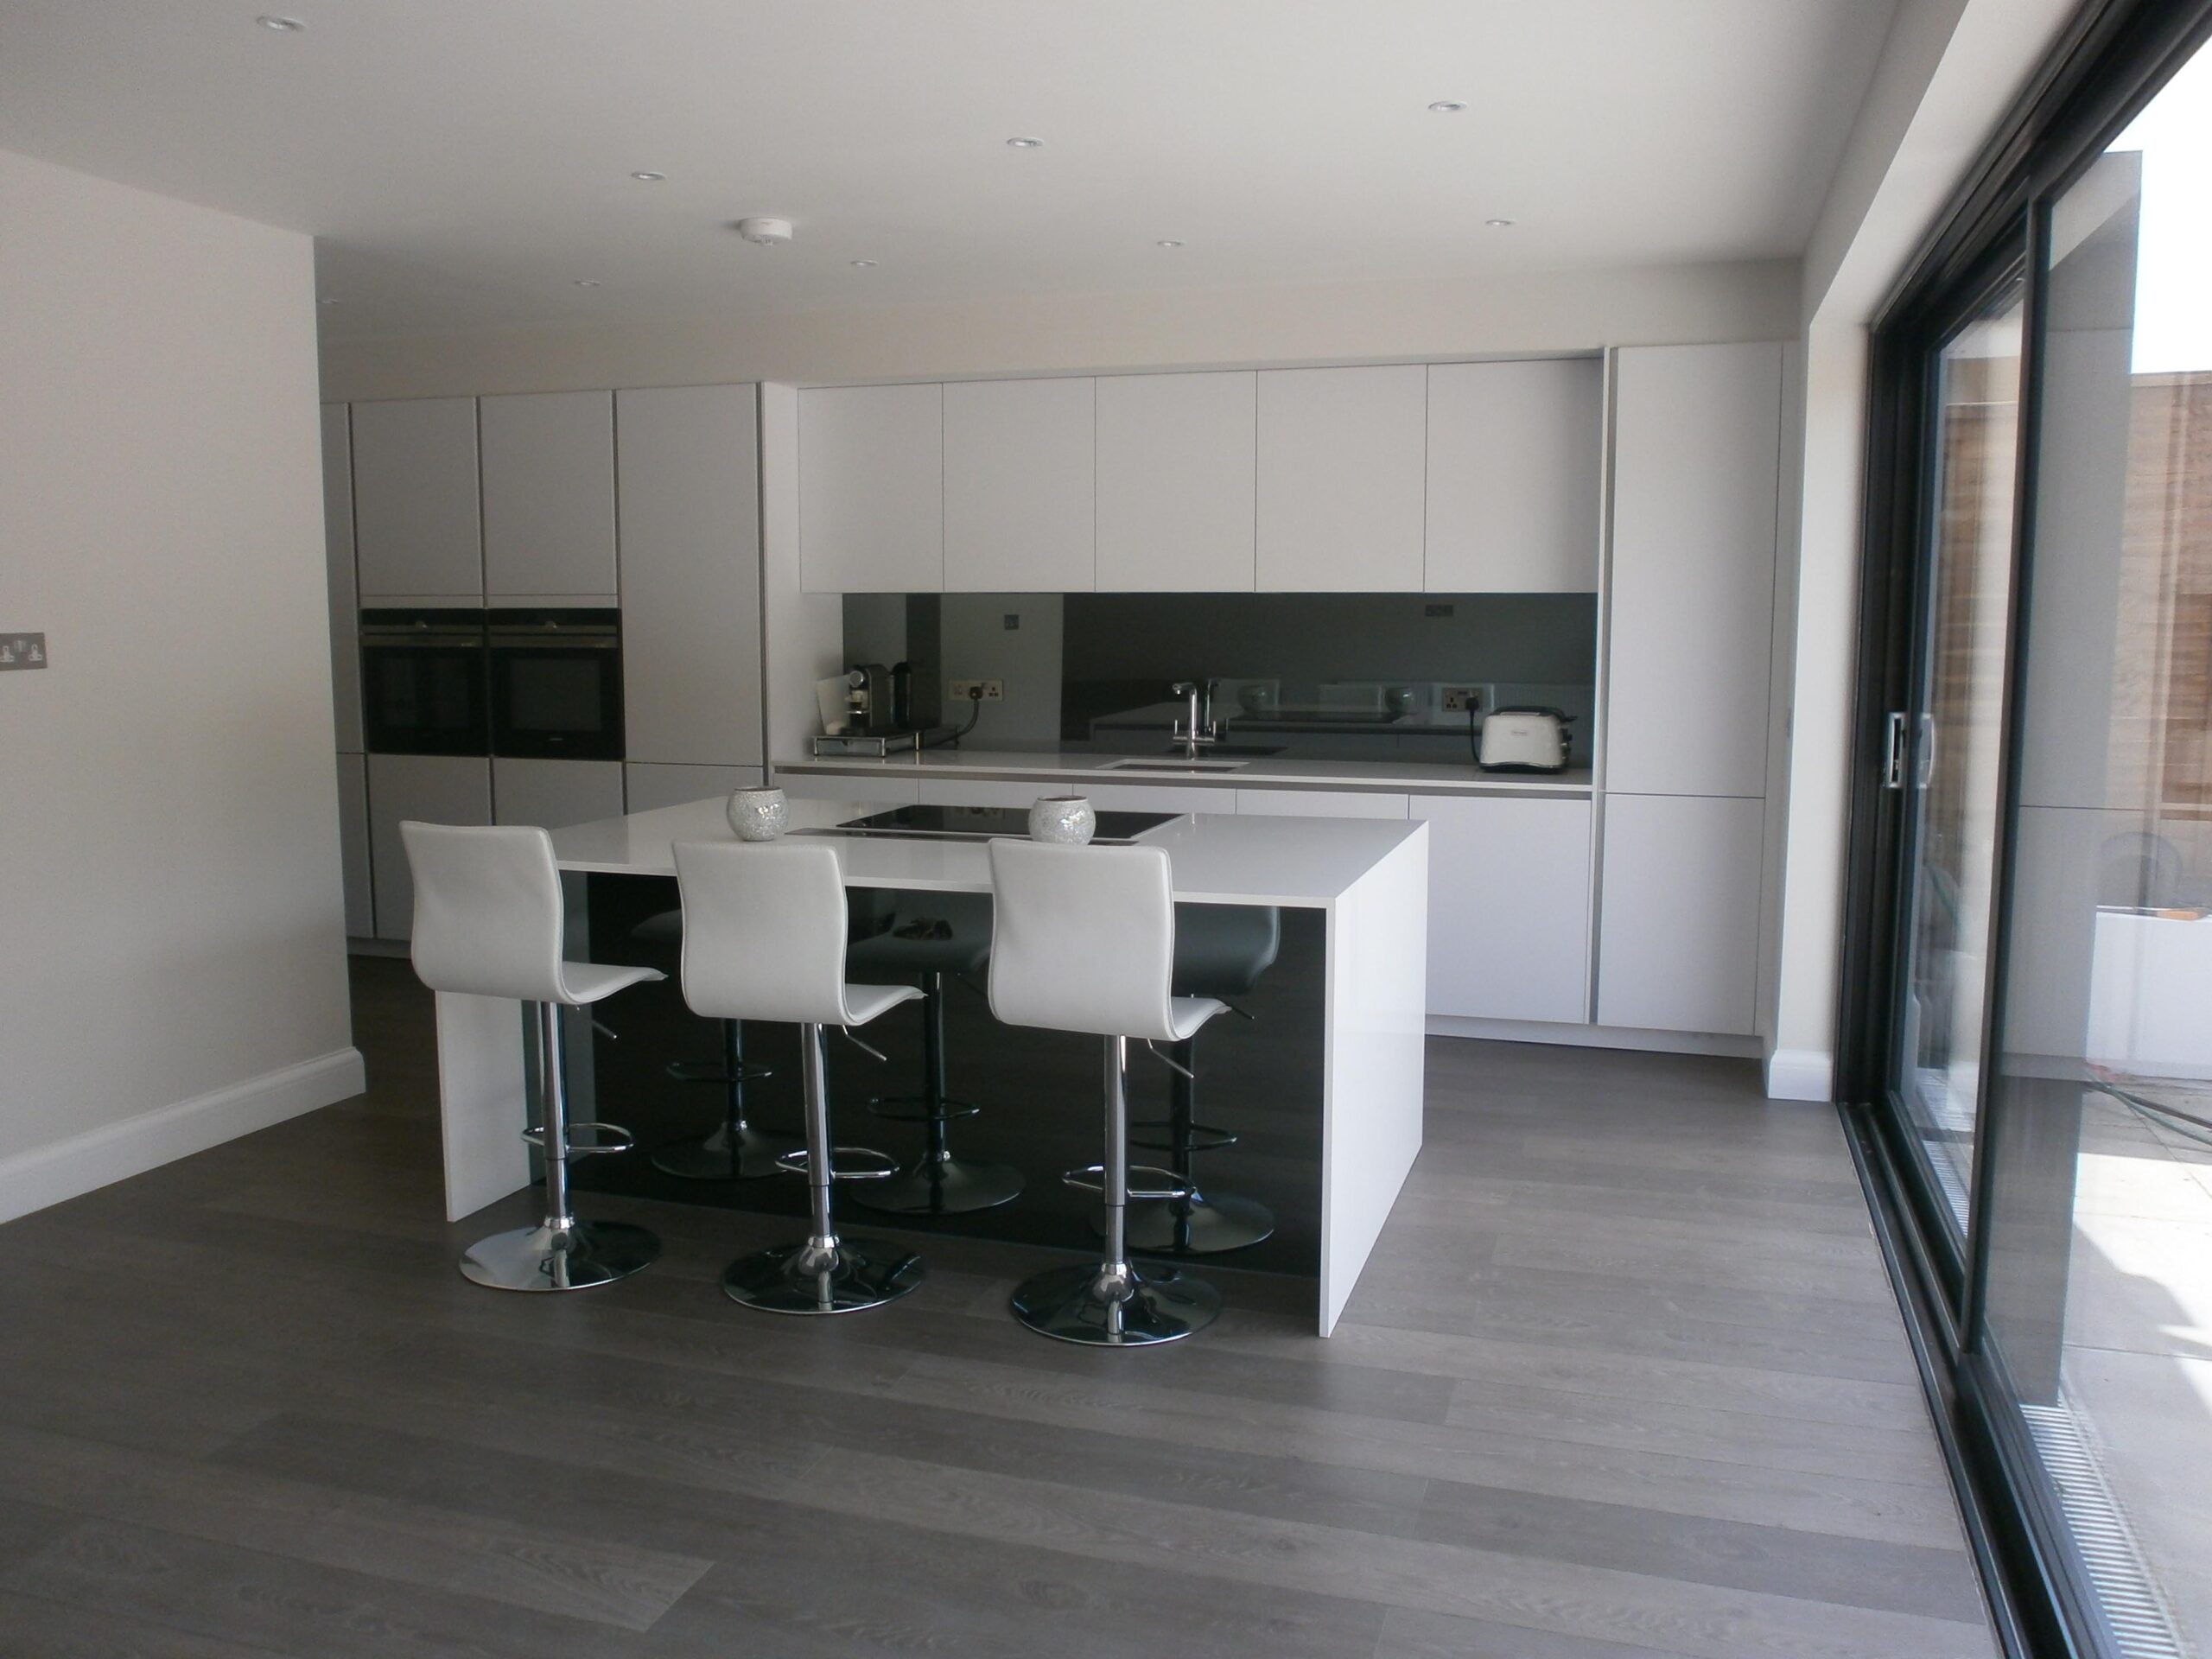 German-made kitchen designed, supplied and installed by Hampdens KB in Oakwood.